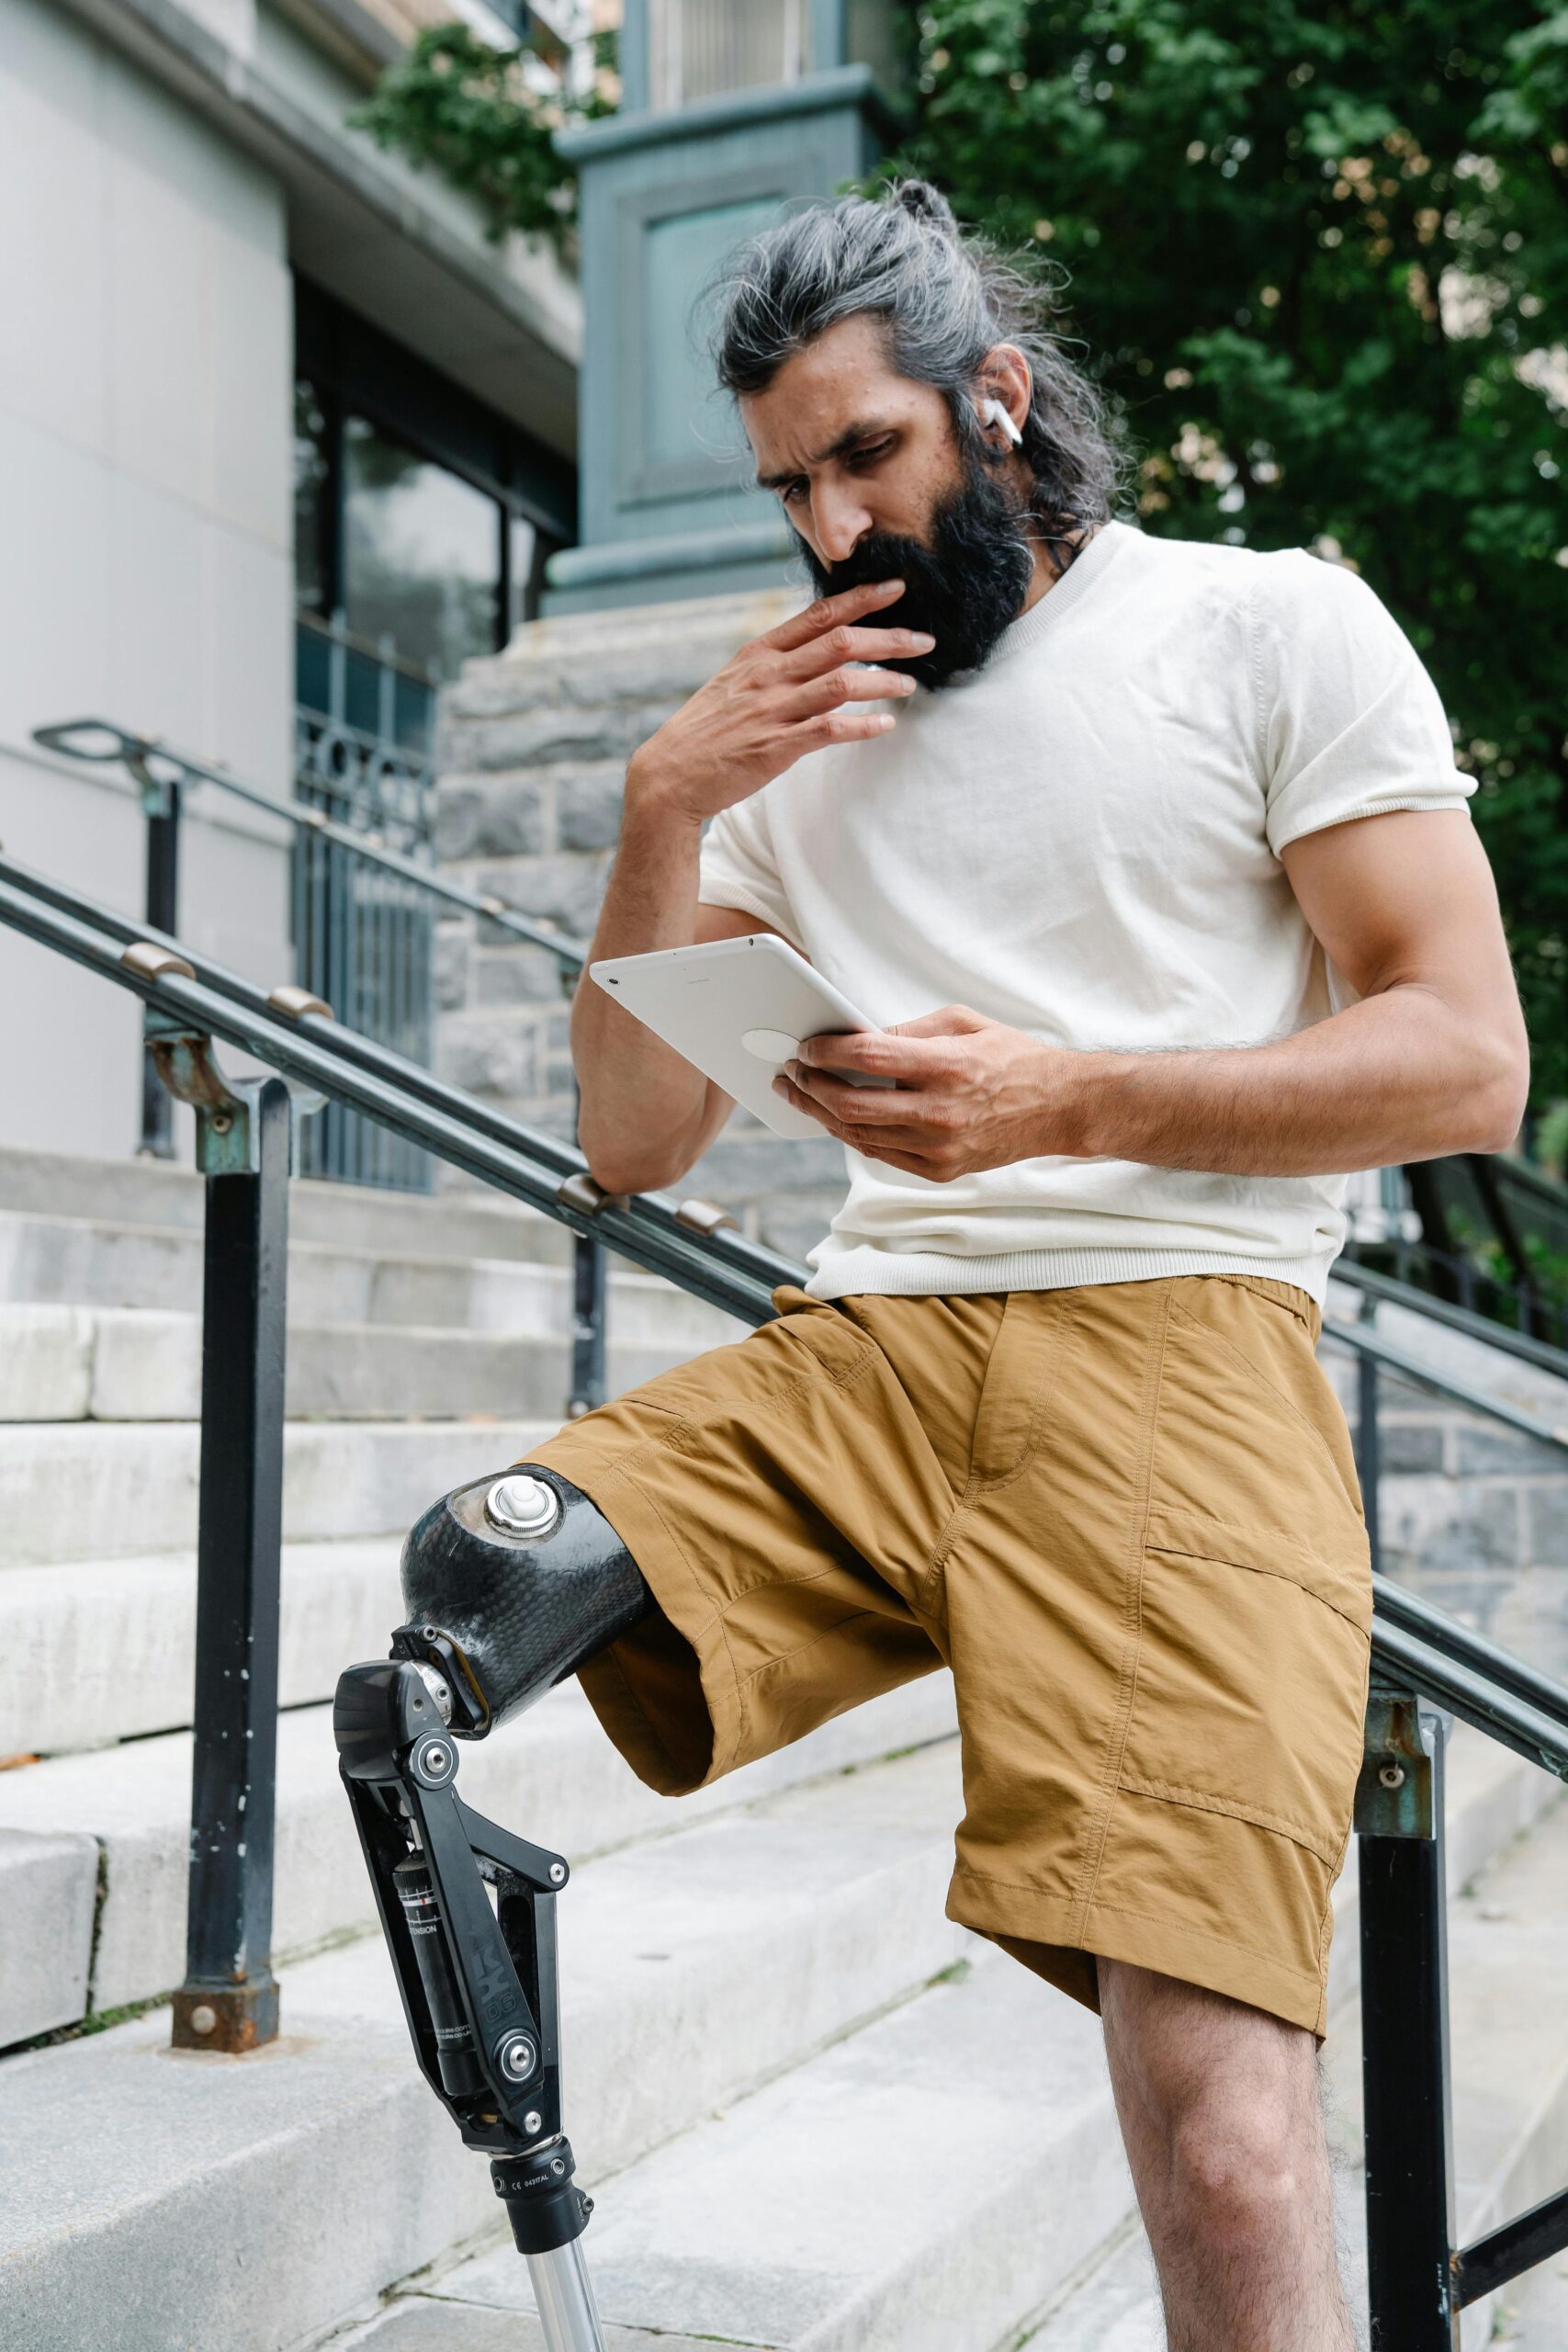 man with artificial leg is standing on stairs and reading from his tablet